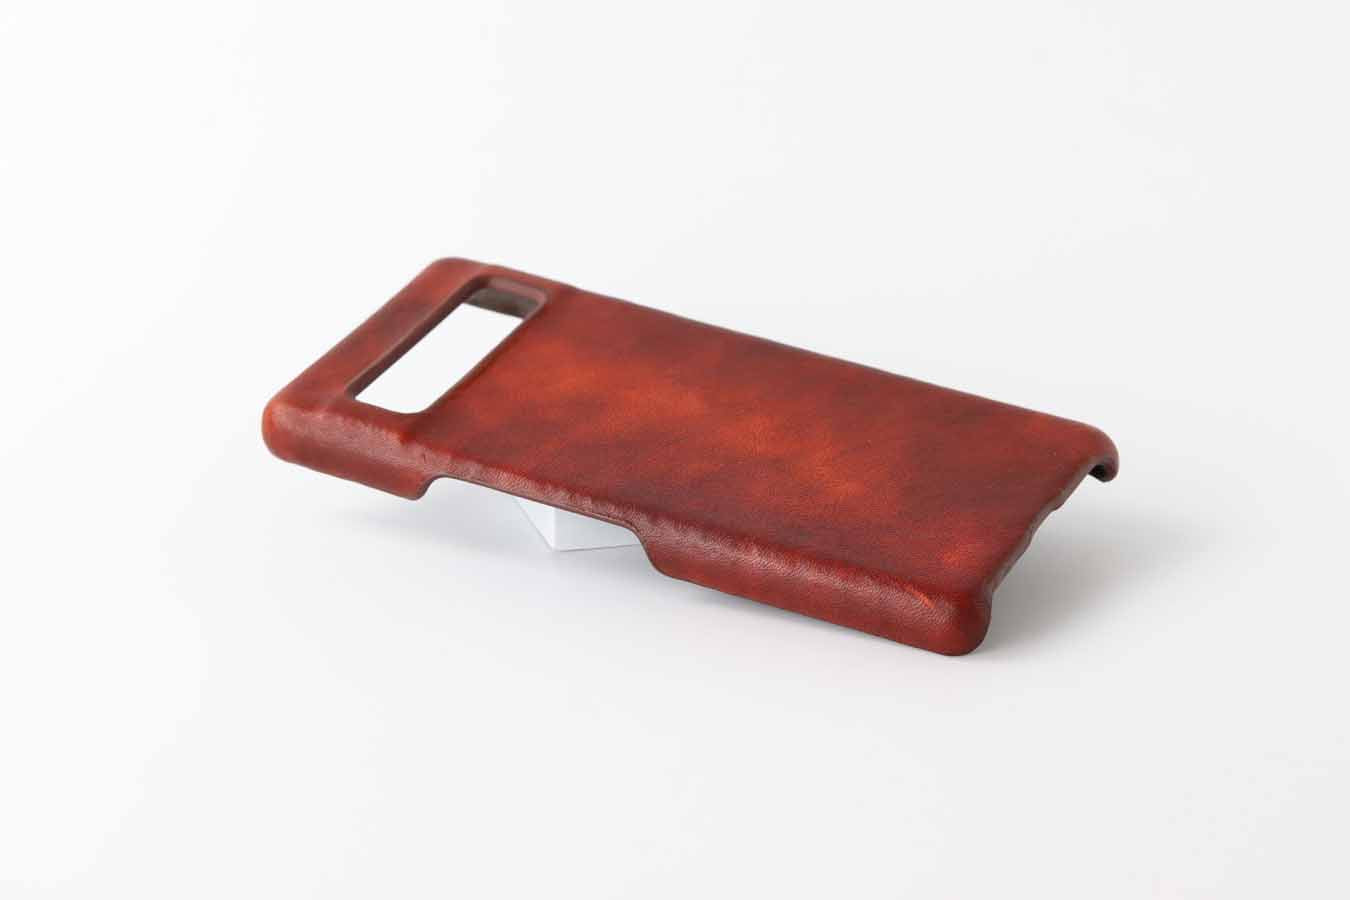 google pixel 7 pro leather hard case, cover. In aged looking leather